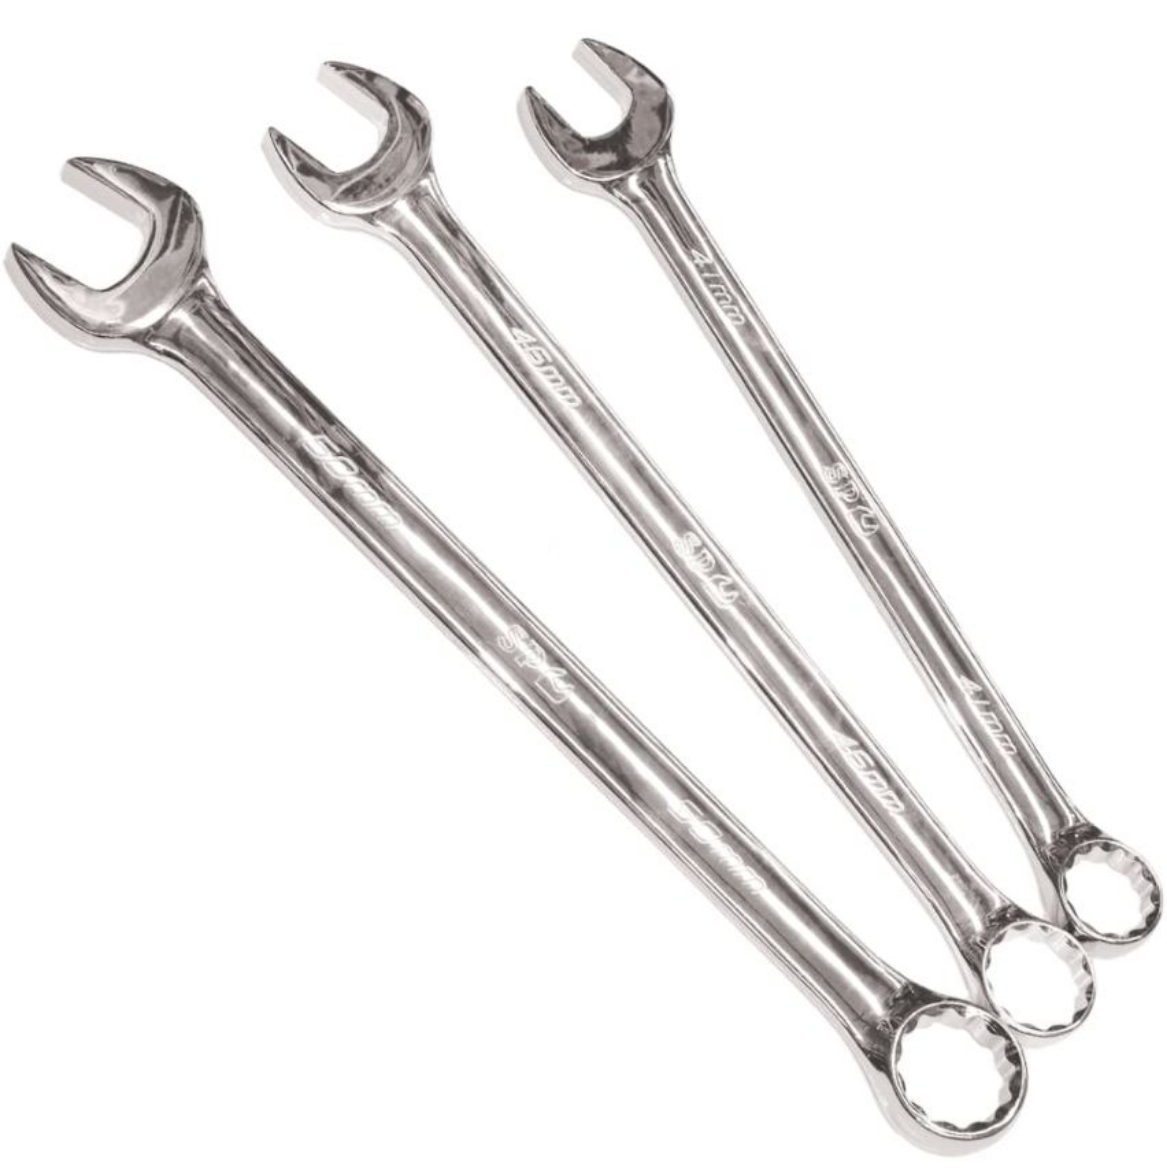 Picture of SET SPANNER ROE JUMBO 3PC METRIC SP TOOLS (41,46,50)